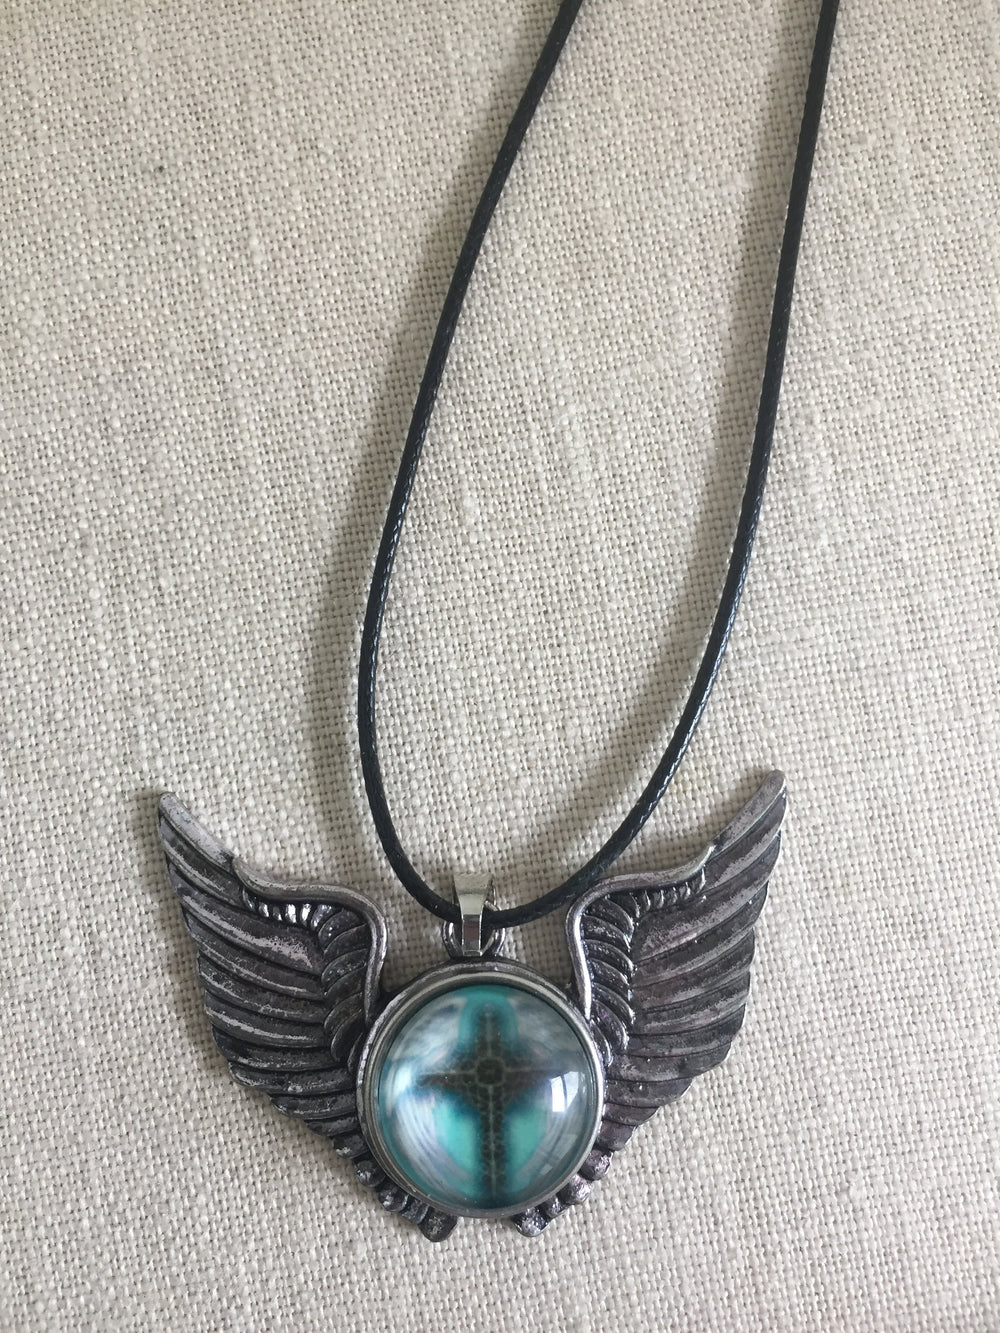 Amelia Silver Wings Snap Pendant shown w/ snap sold separately